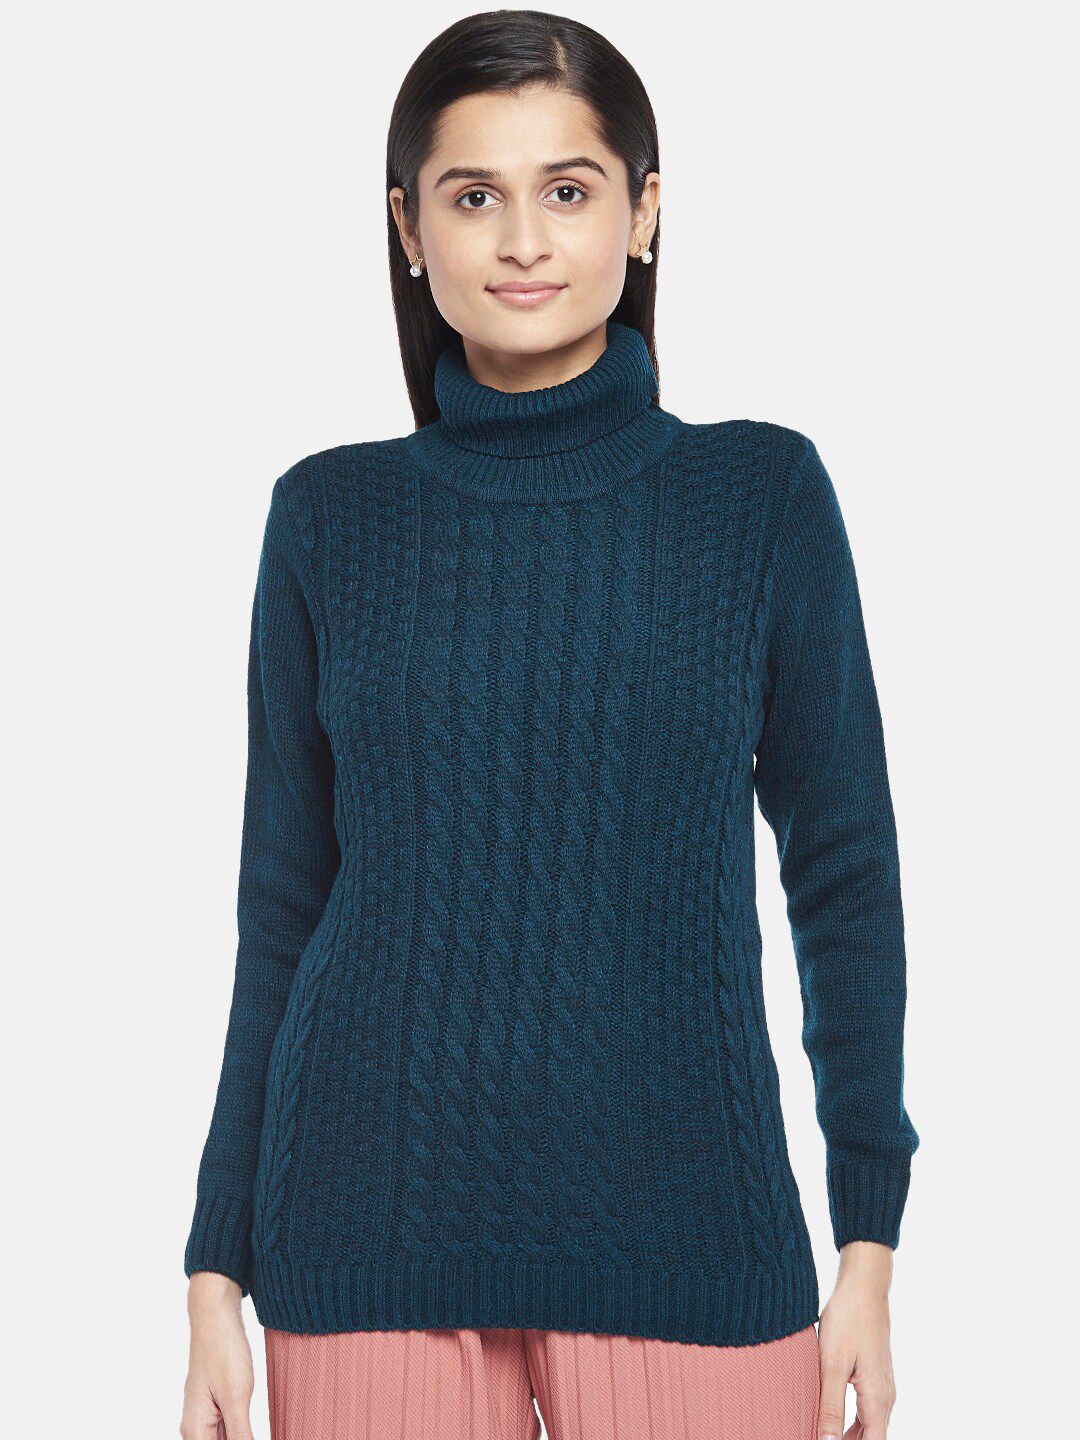 Honey by Pantaloons Women Teal Blue Cable Knit Pure Acrylic Pullover Price in India